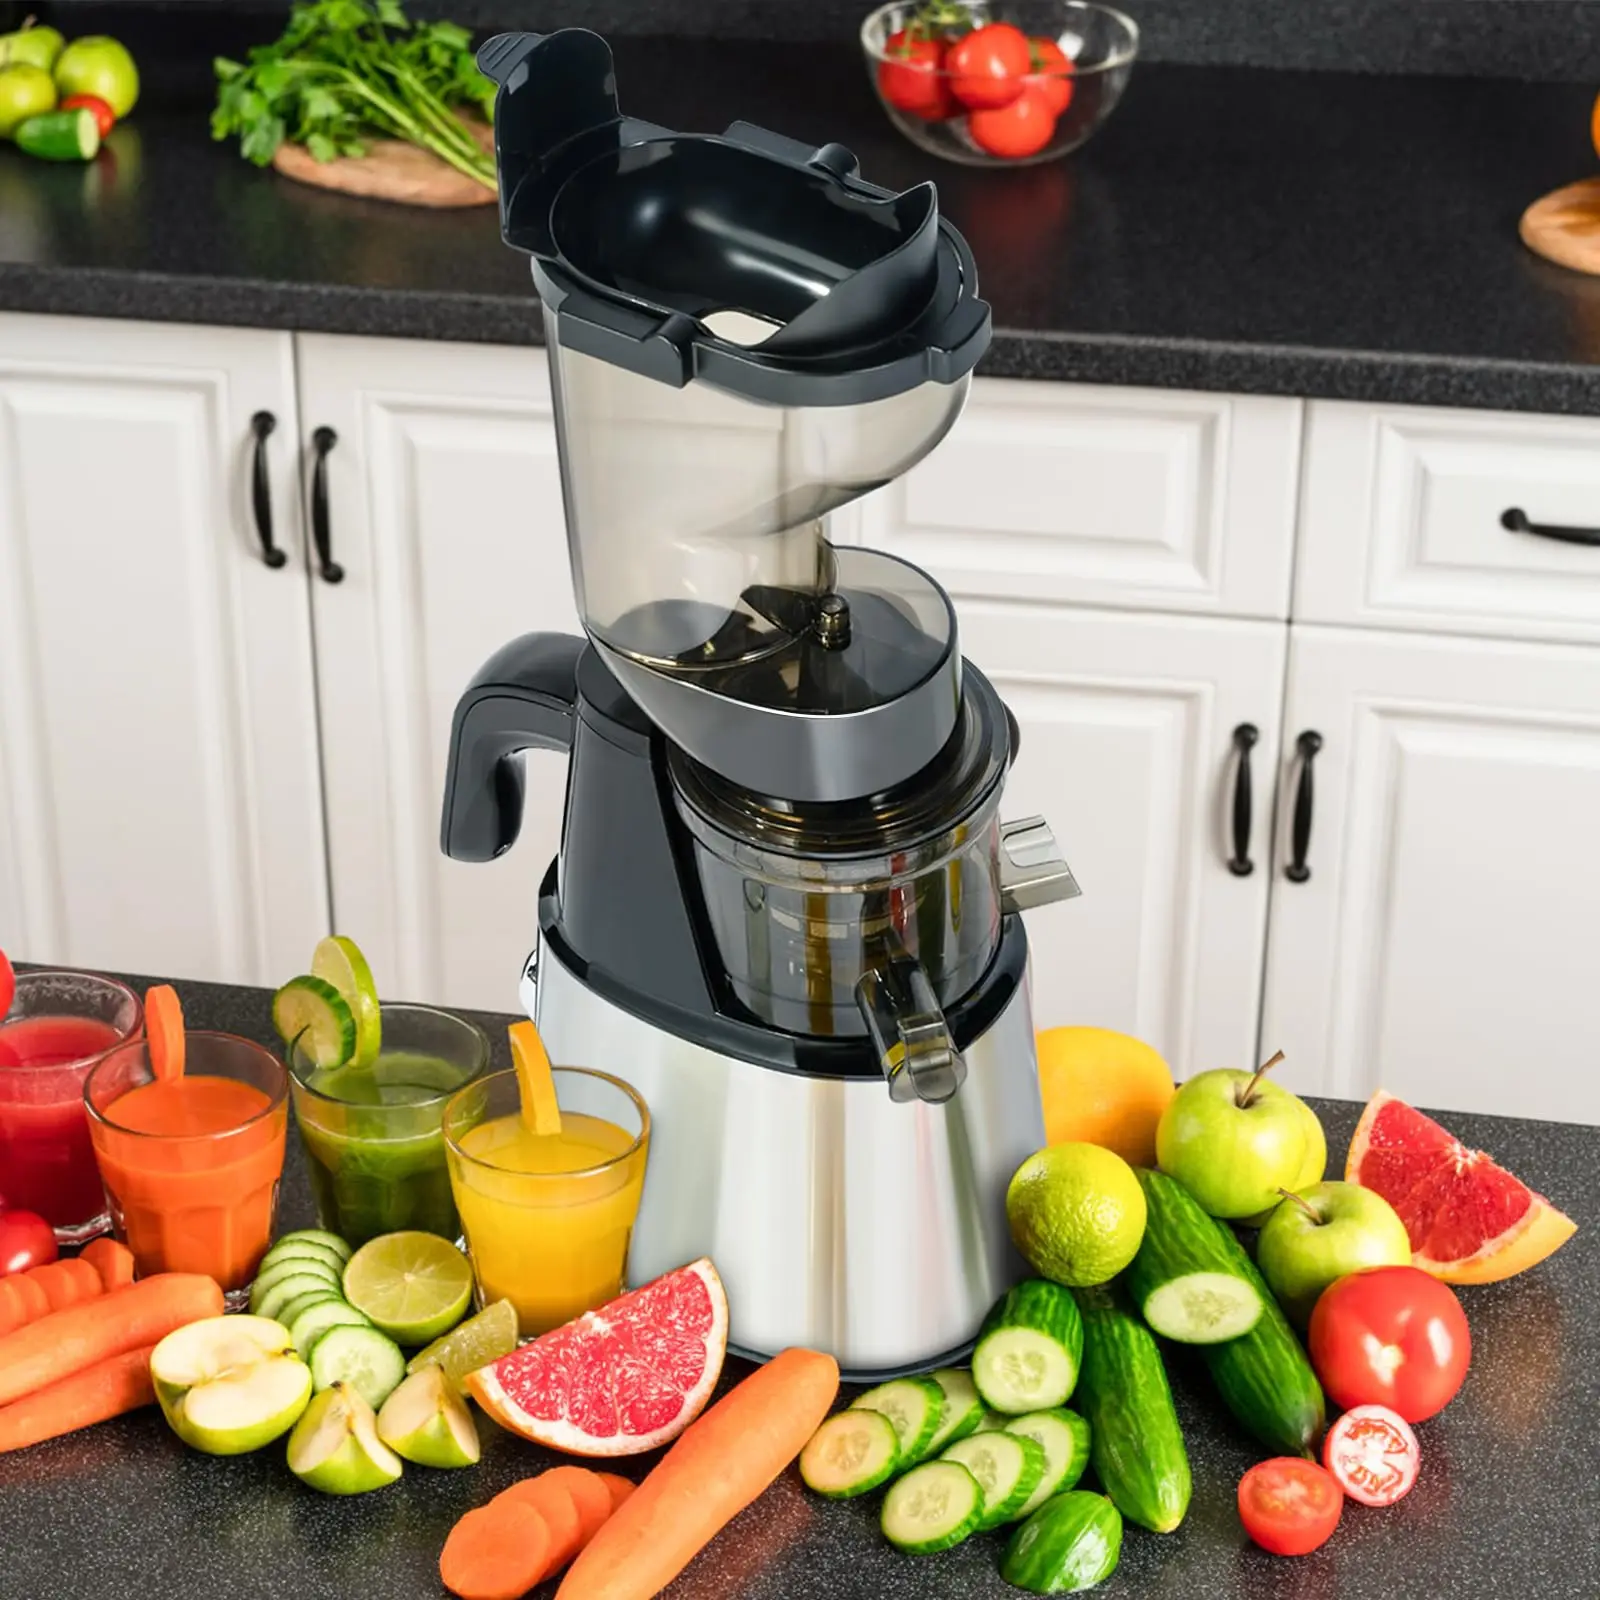 

OverTwice Cold Press Juicer Machines, 5 Inch(127mm) Slow Masticating Juicer with Large Feed Chute, 250W Electric Juicer Machines